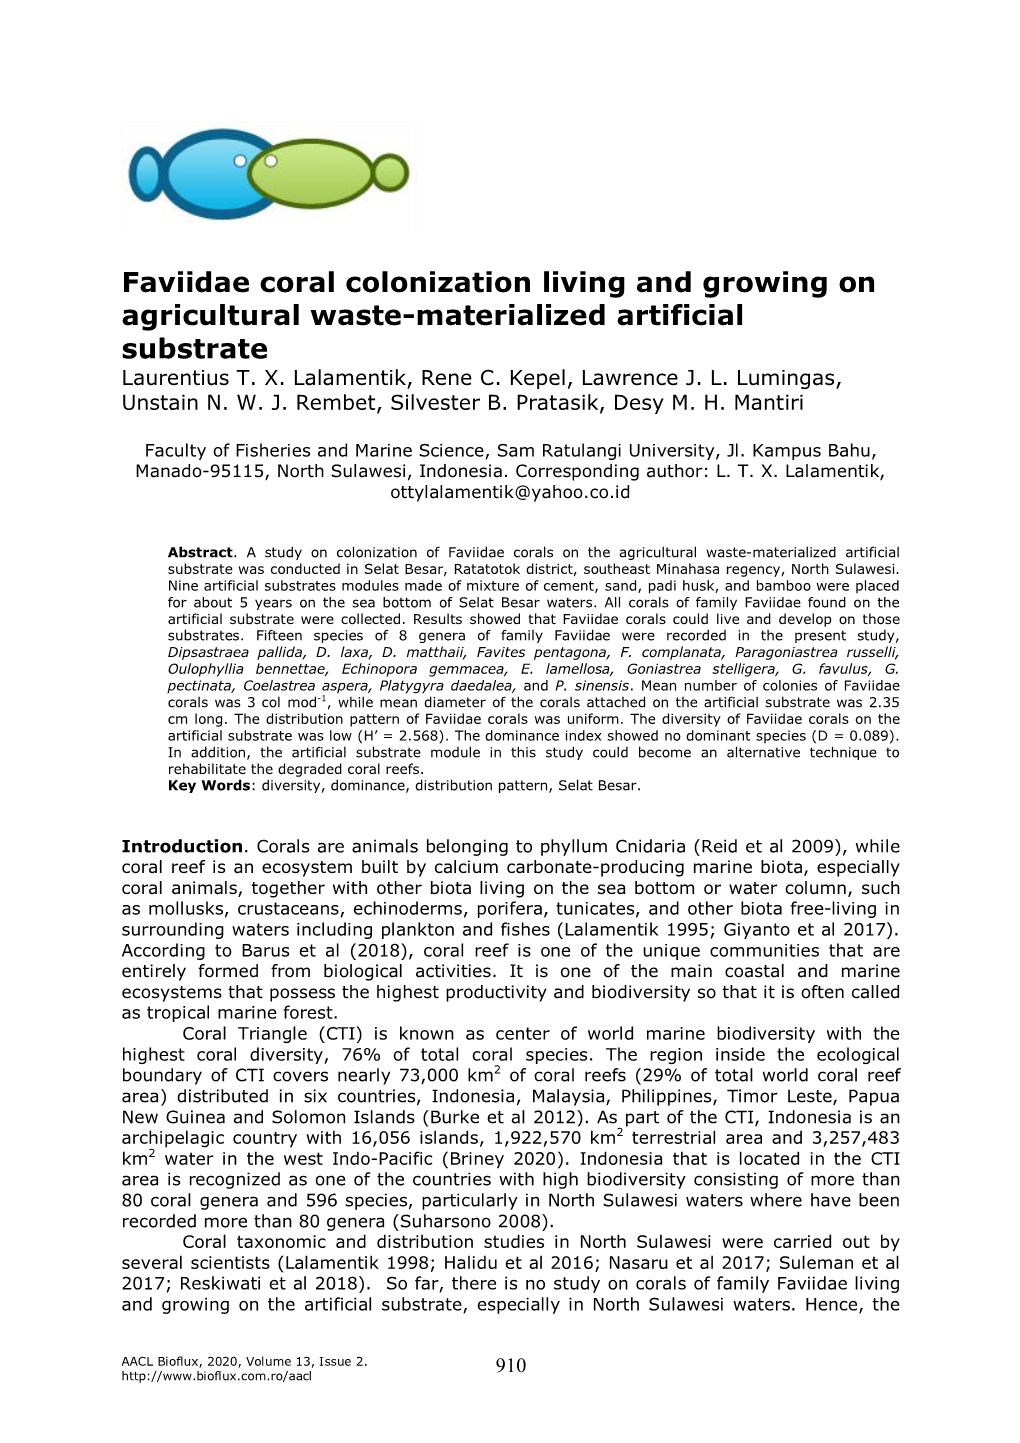 Faviidae Coral Colonization Living and Growing on Agricultural Waste-Materialized Artificial Substrate Laurentius T